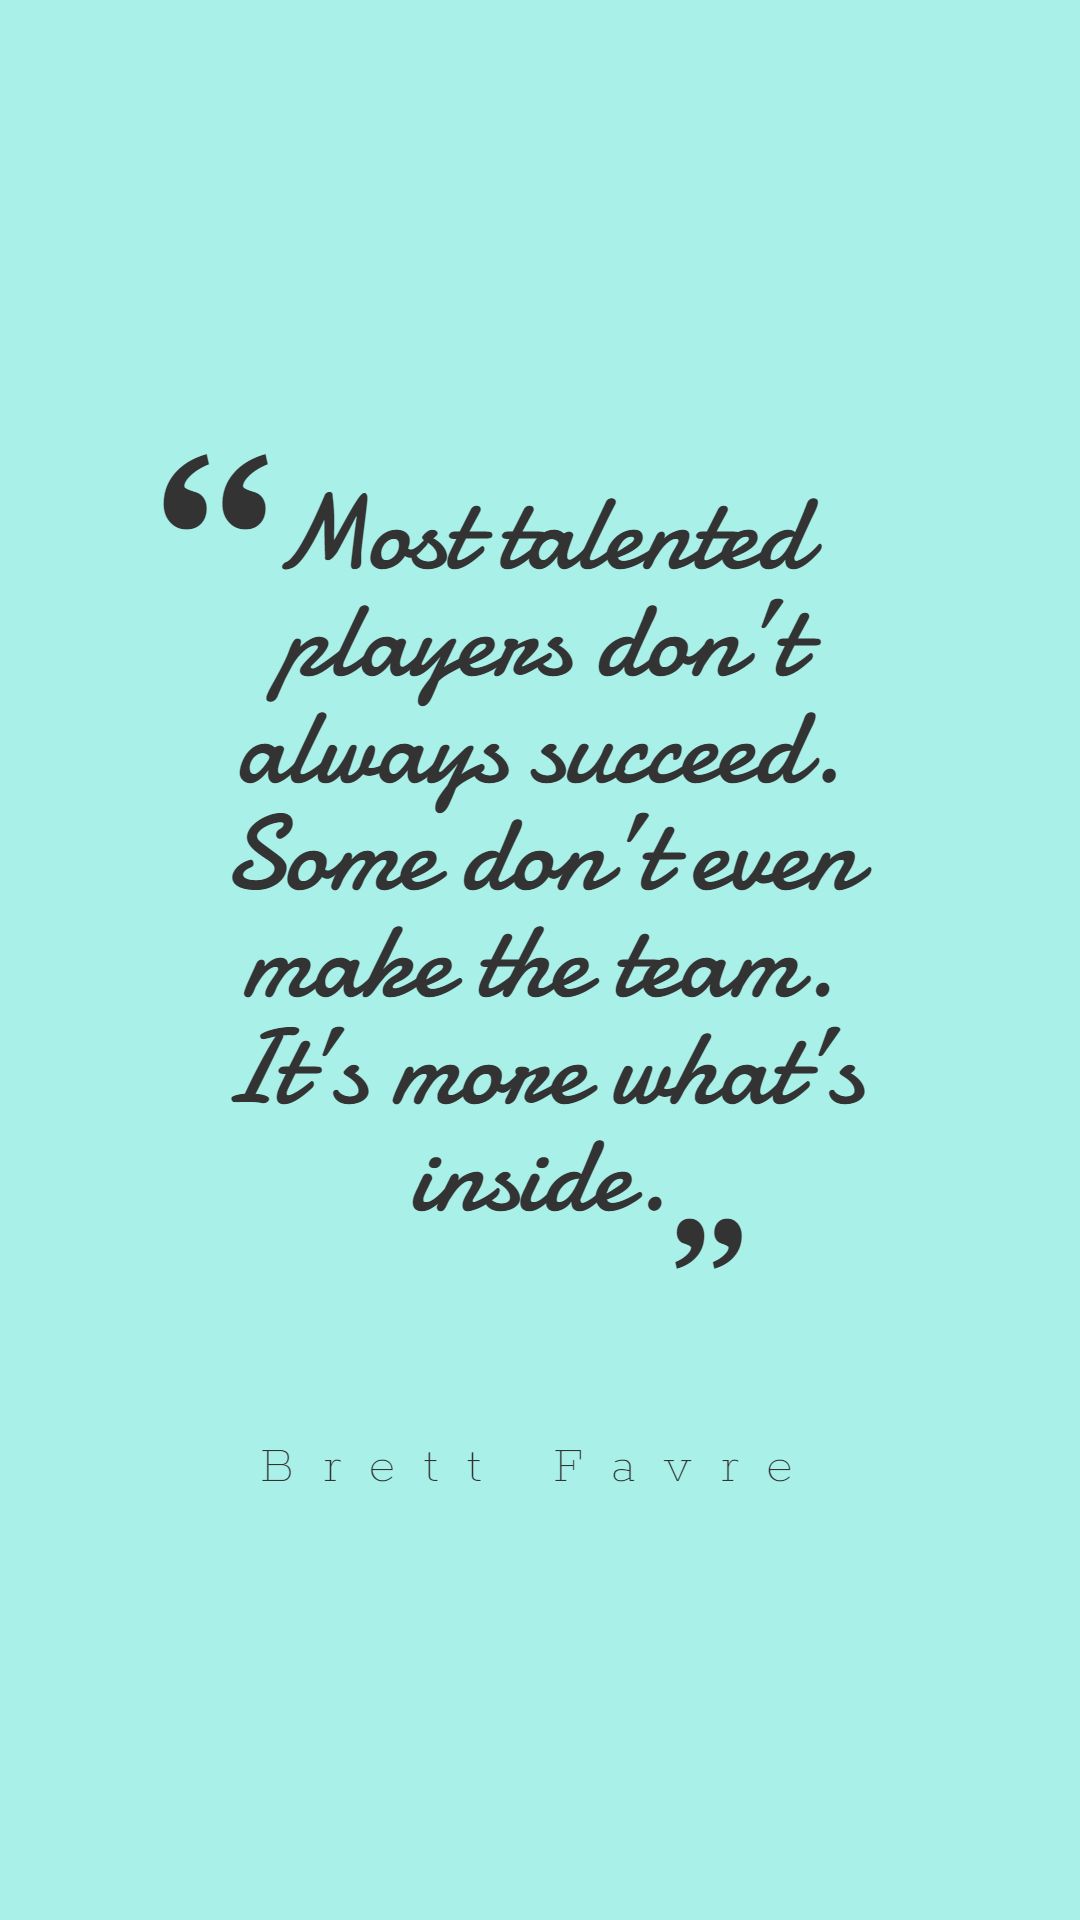 Most talented players don’t always succeed. Some don’t even make the team. It’s more what’s inside.